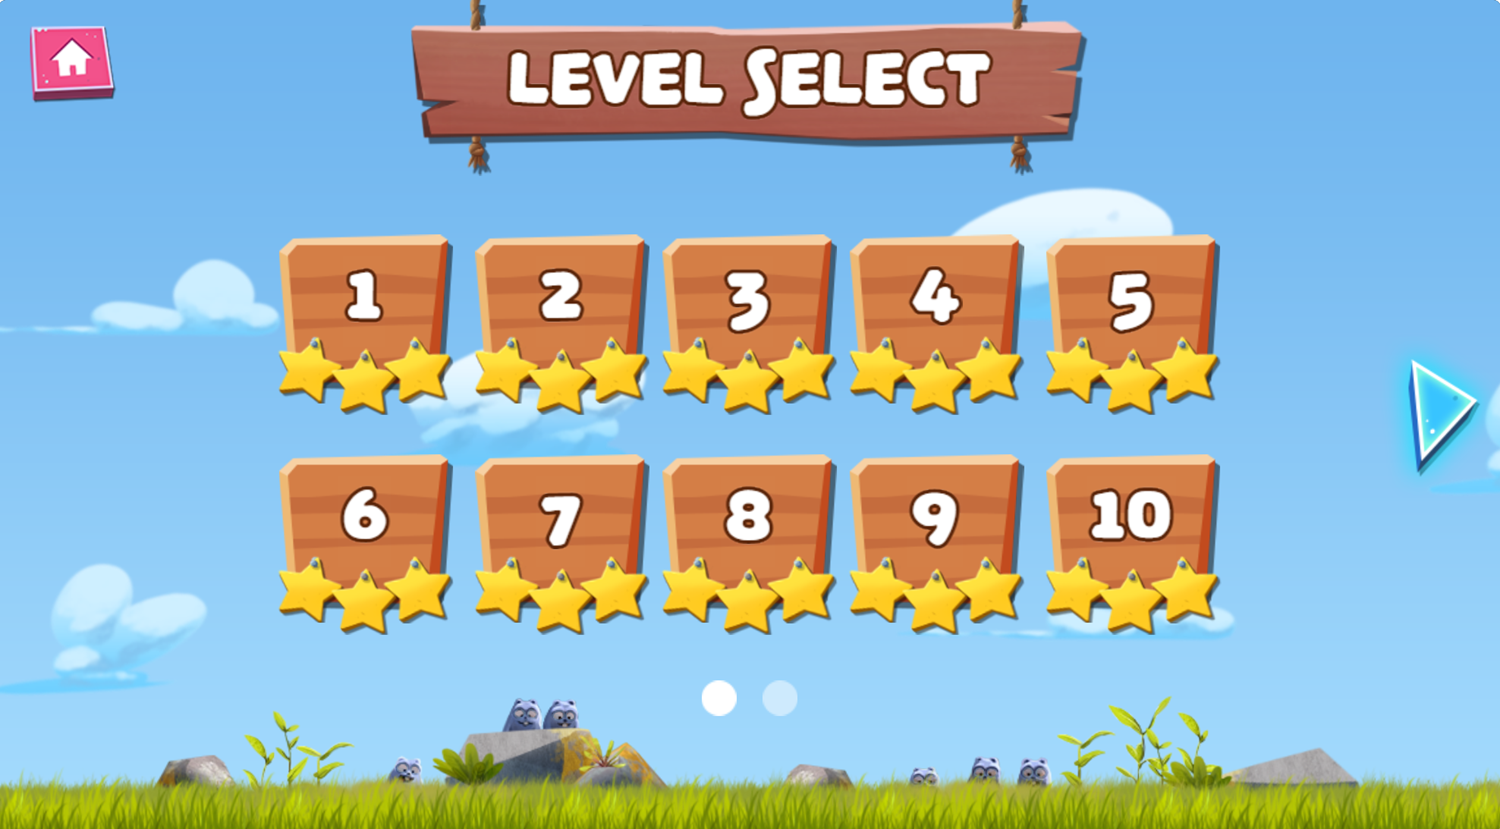 Grizzy and the Lemmings Lemmings Launch Game Level Select Complete Screenshot.